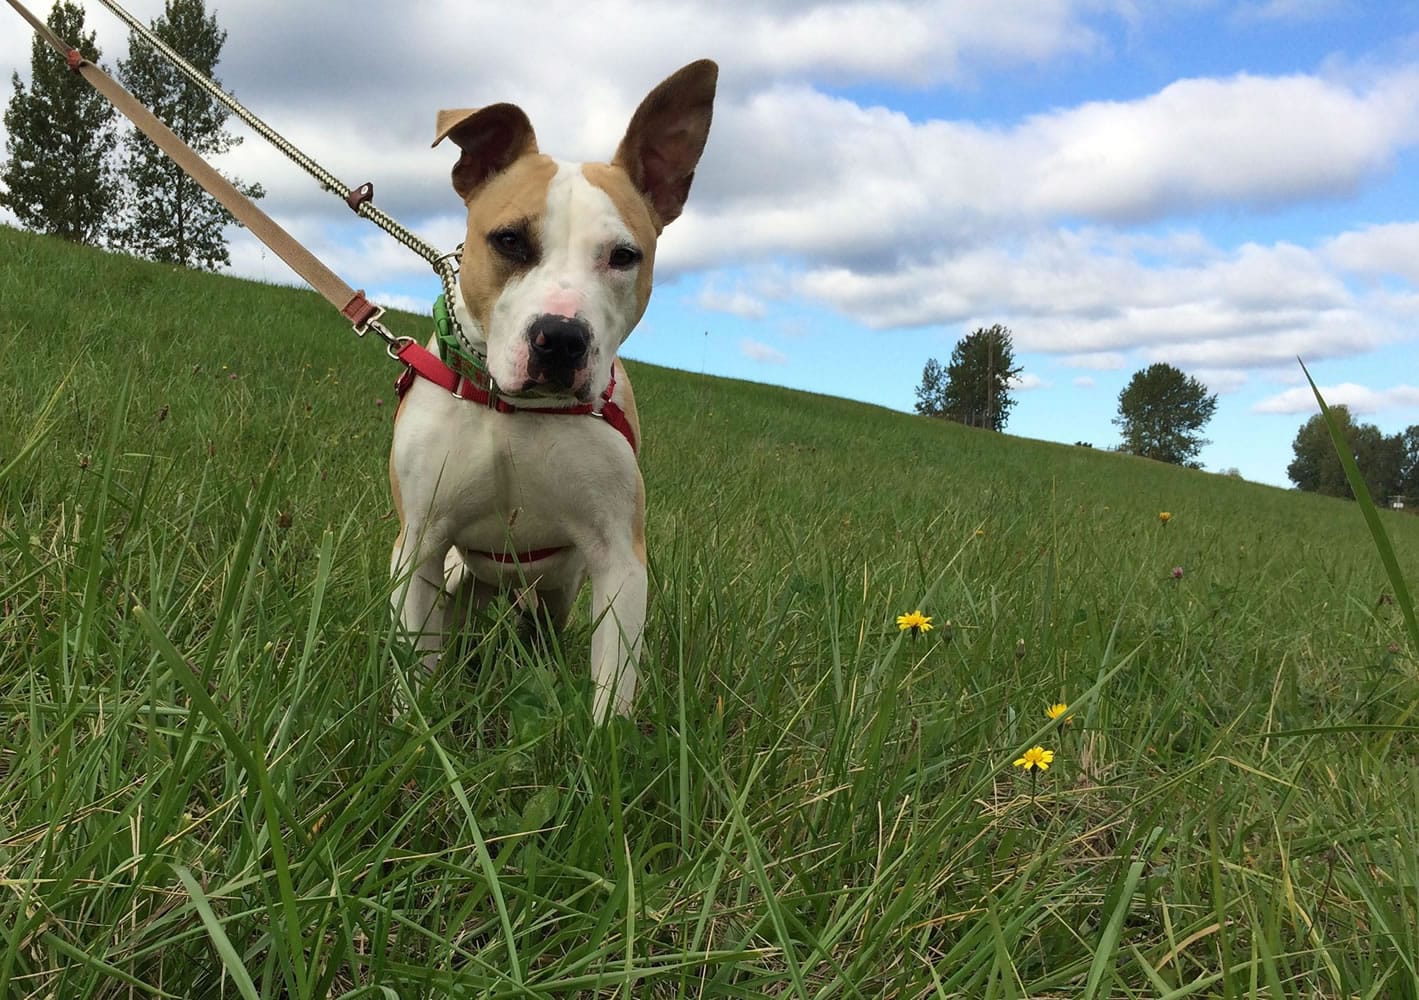 Gatsby is a handsome 1 1/2 -year-old terrier who&#039;s eager to explore the world with a new family. He&#039;s an active dog and would make a great hiking or running buddy. At day&#039;s end, he wants to relax in a calm home. Gatsby will be a loyal and affectionate companion for his new family.